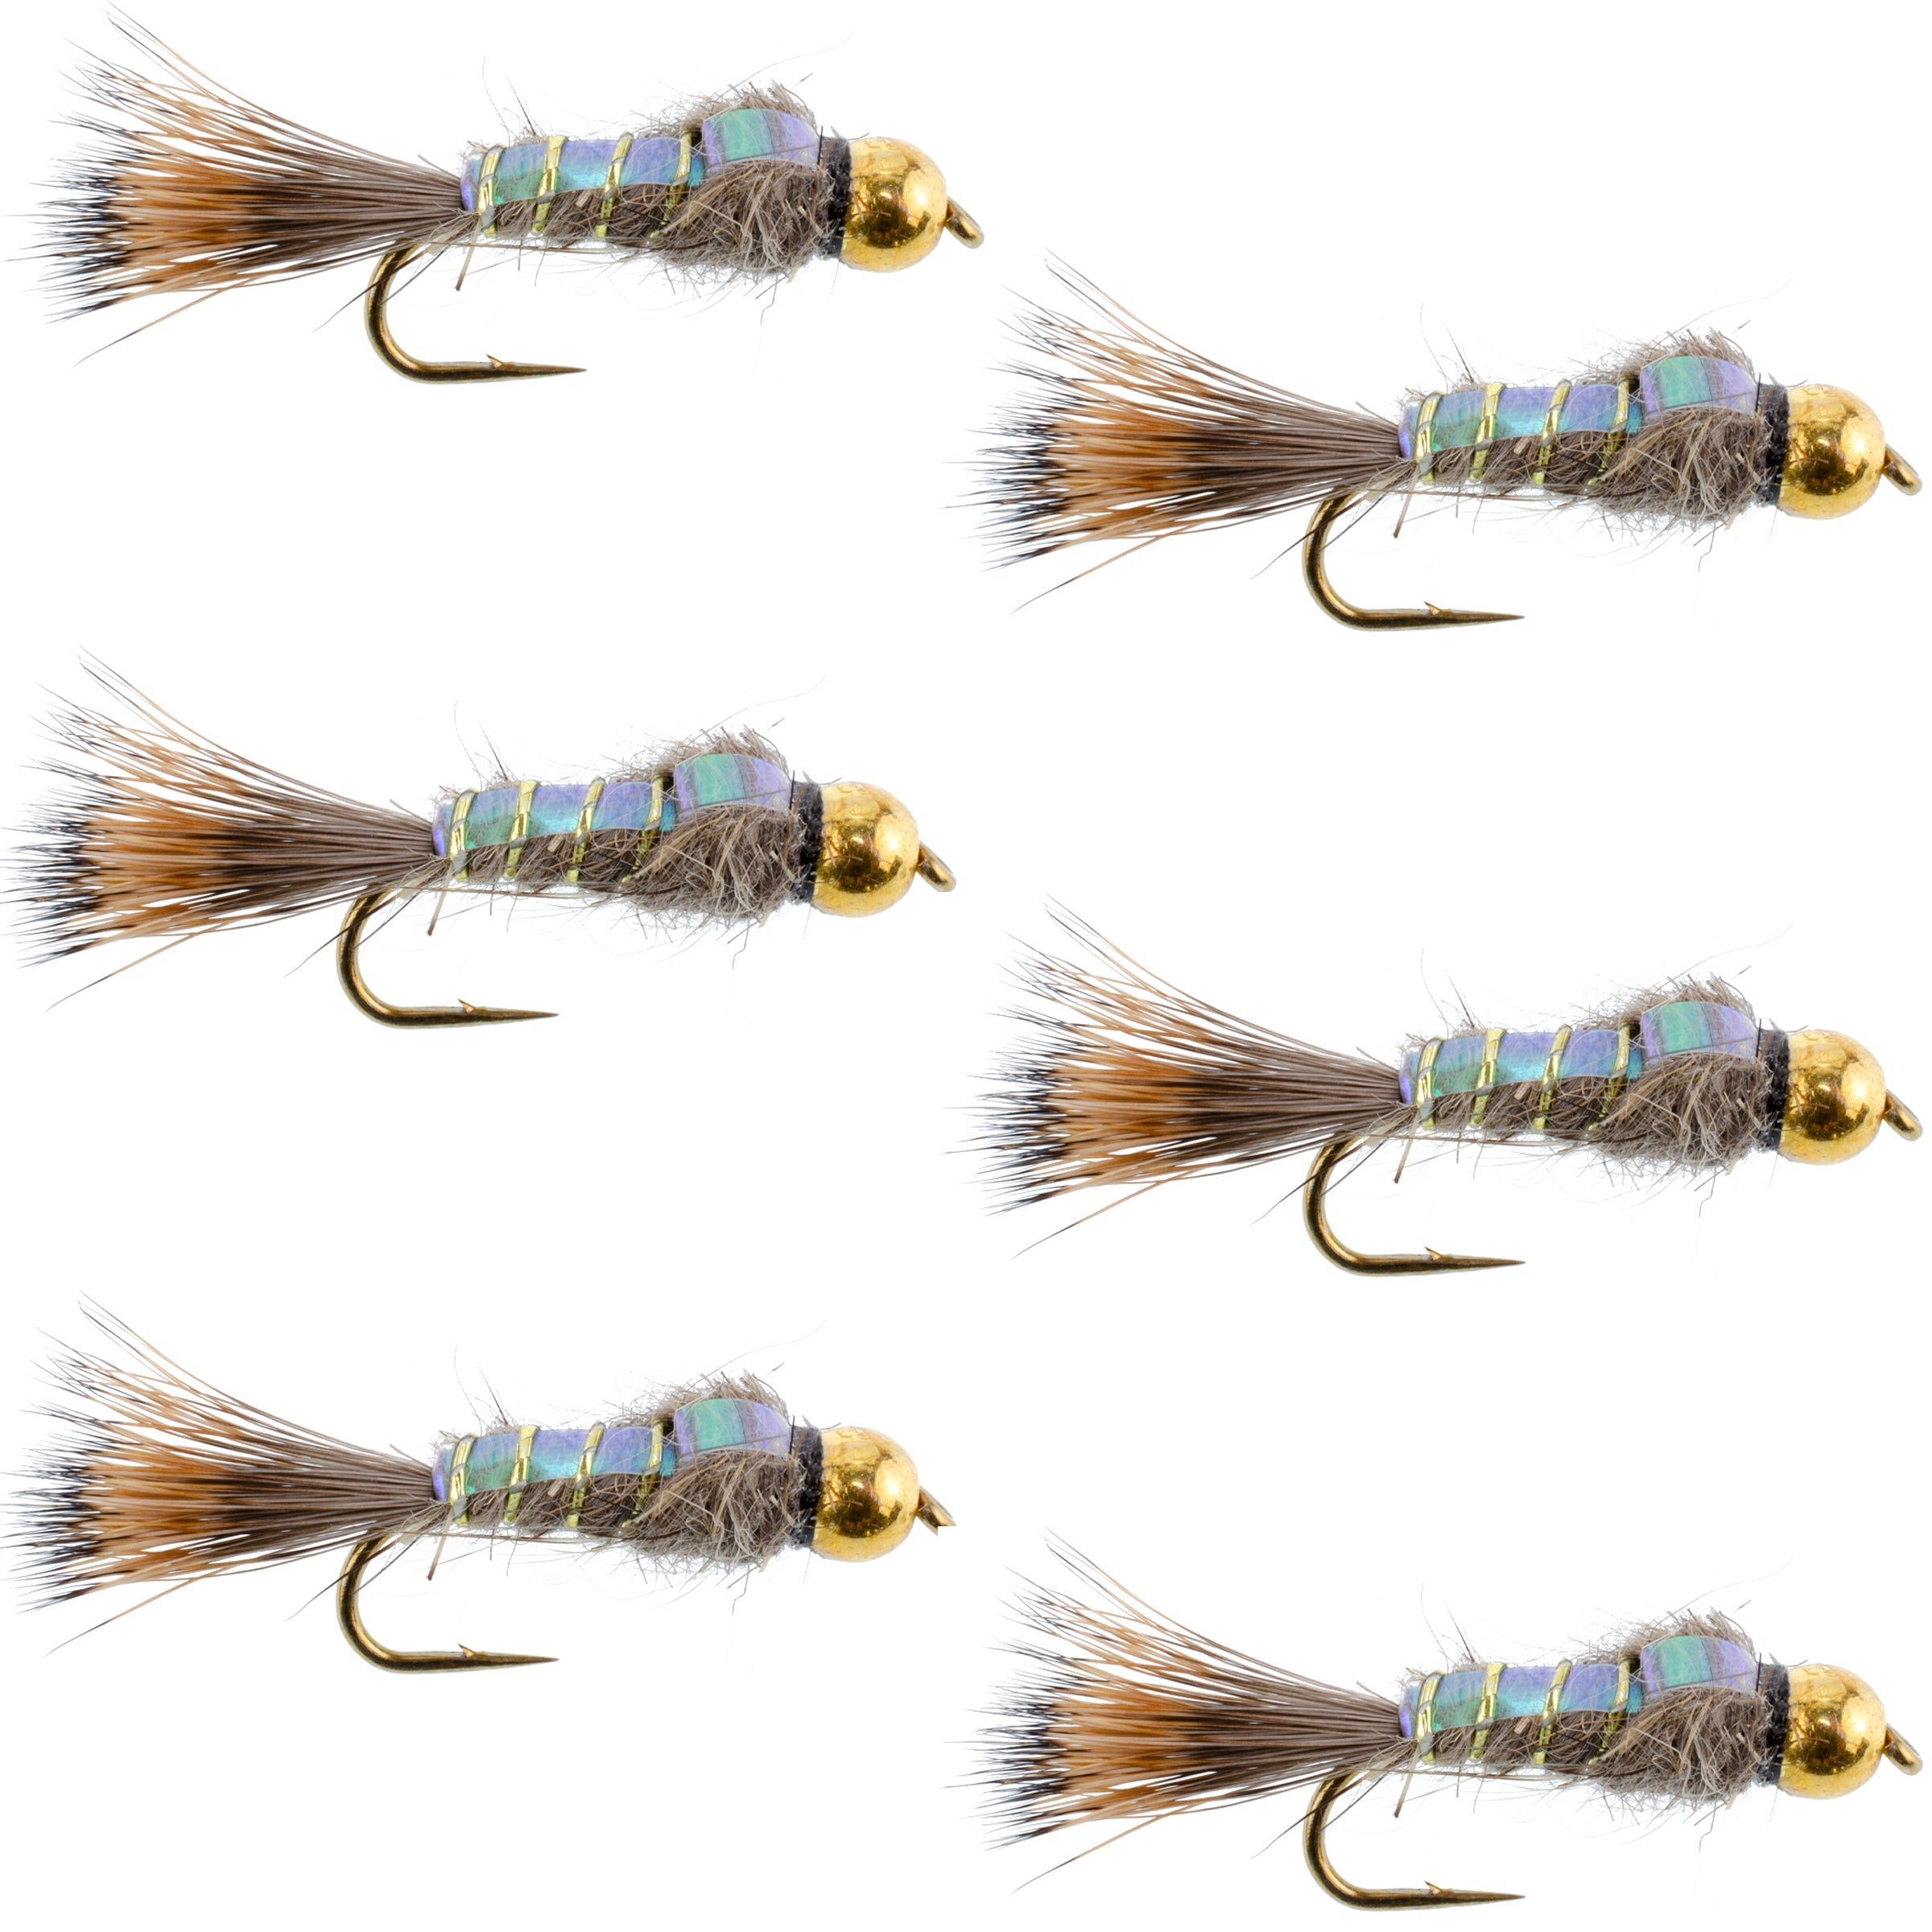 Tungsten Bead Head Nymph Fly Fishing Flies - Flashback Gold Ribbed Hare's Ear Trout Fly - Nymph Wet Fly - 6 Flies Hook Size 18